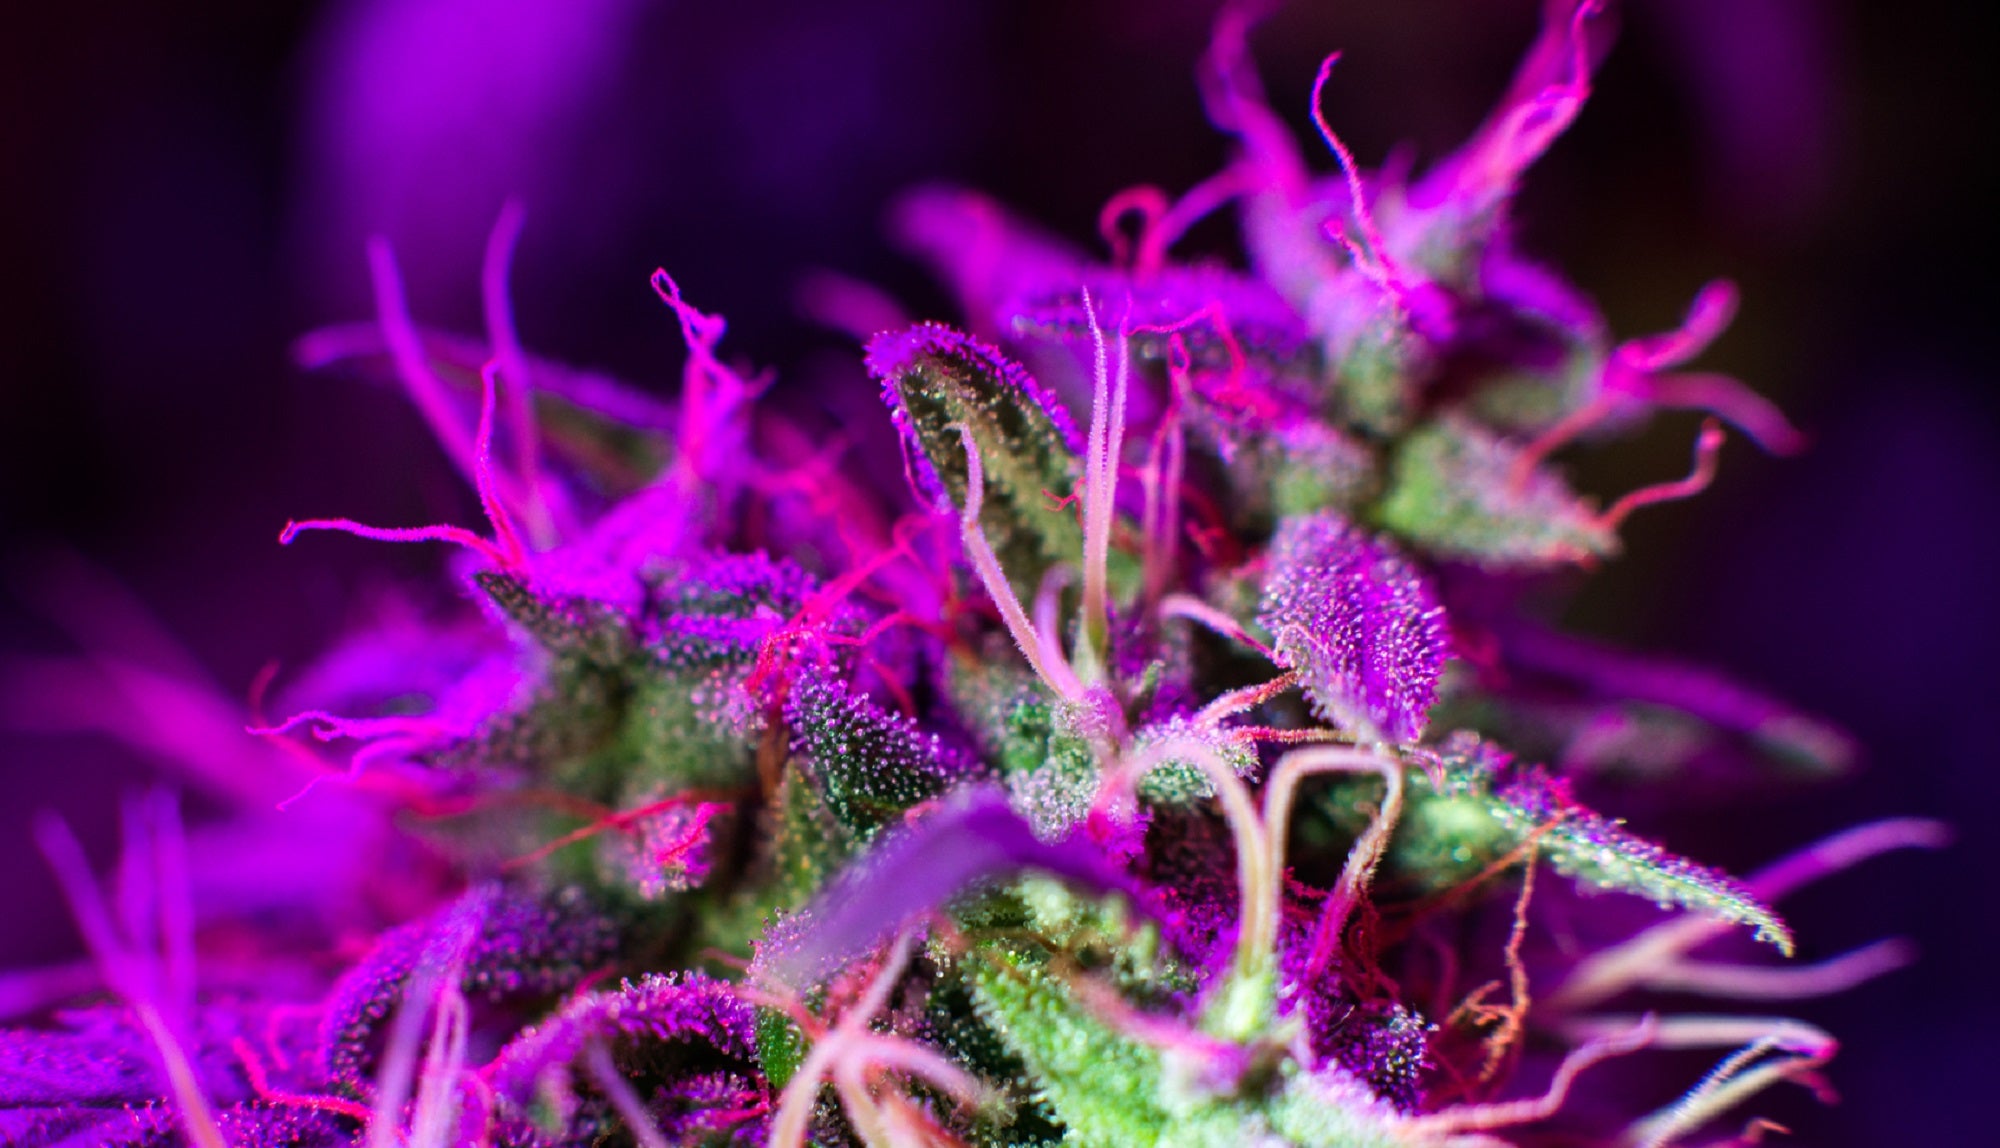 On 420, learn more about weed with these carefully cultivated science stories